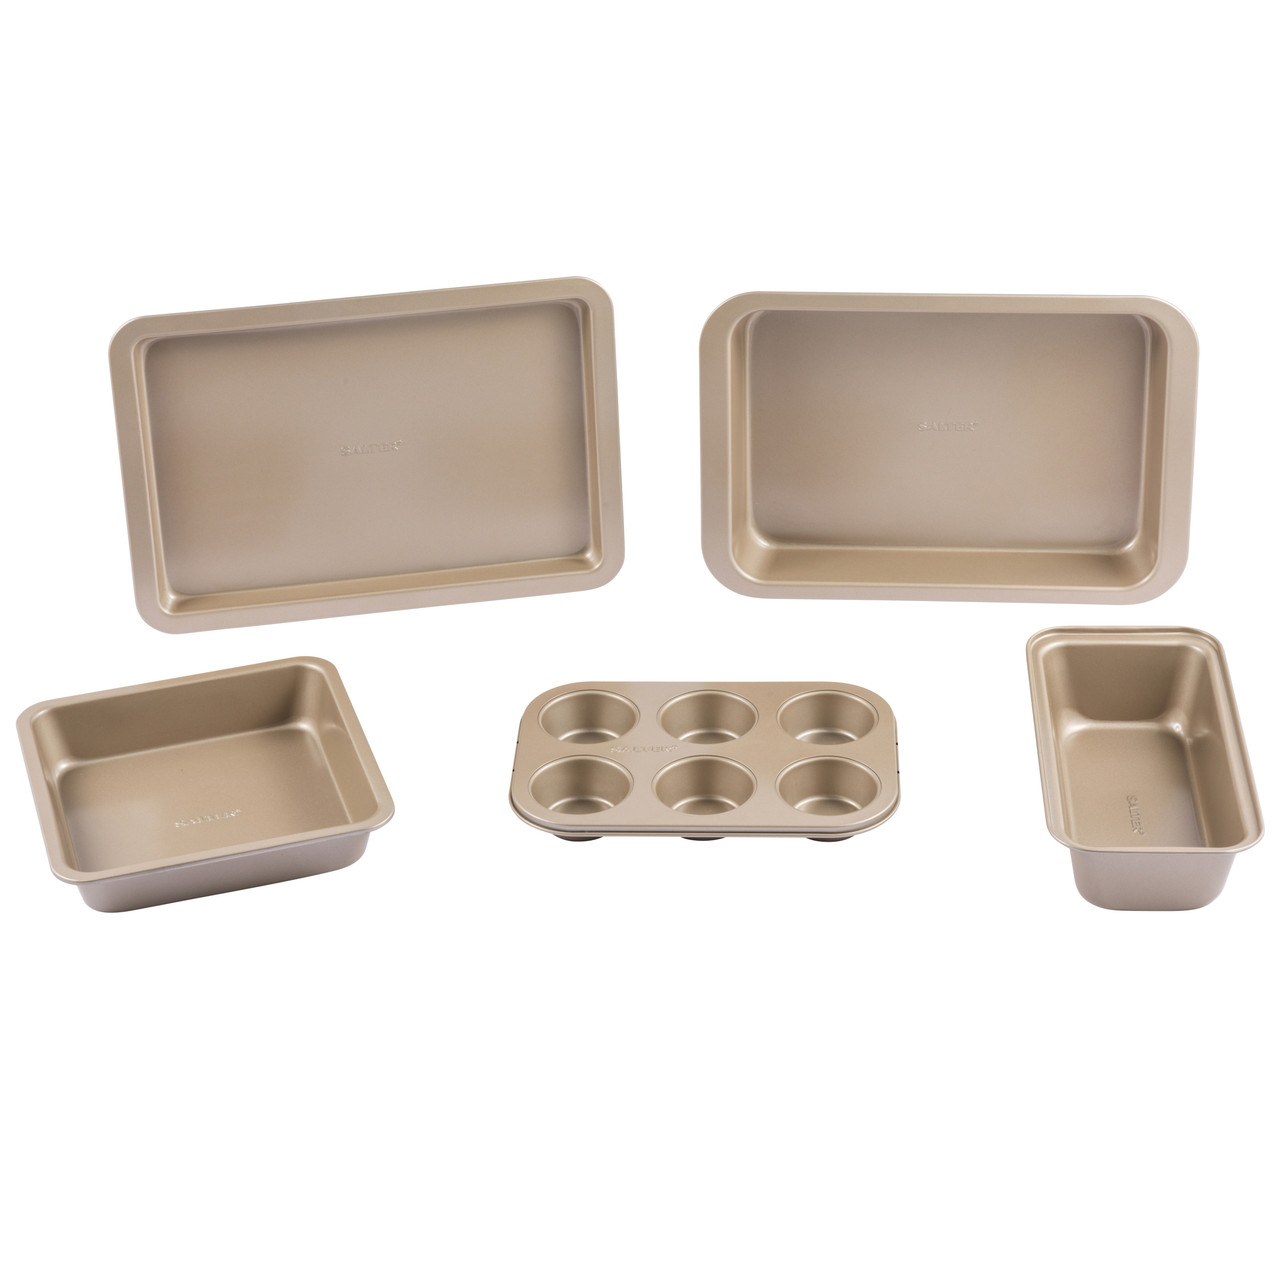 https://cdn11.bigcommerce.com/s-5vfc75n1yv/images/stencil/1280x1280/products/4521/47927/bakes-5-piece-non-stick-bakeware-set--oven-safe-pfoa-free-gold-salter-bw12603geu7-5054061551082__96889.1701144048.jpg?c=1